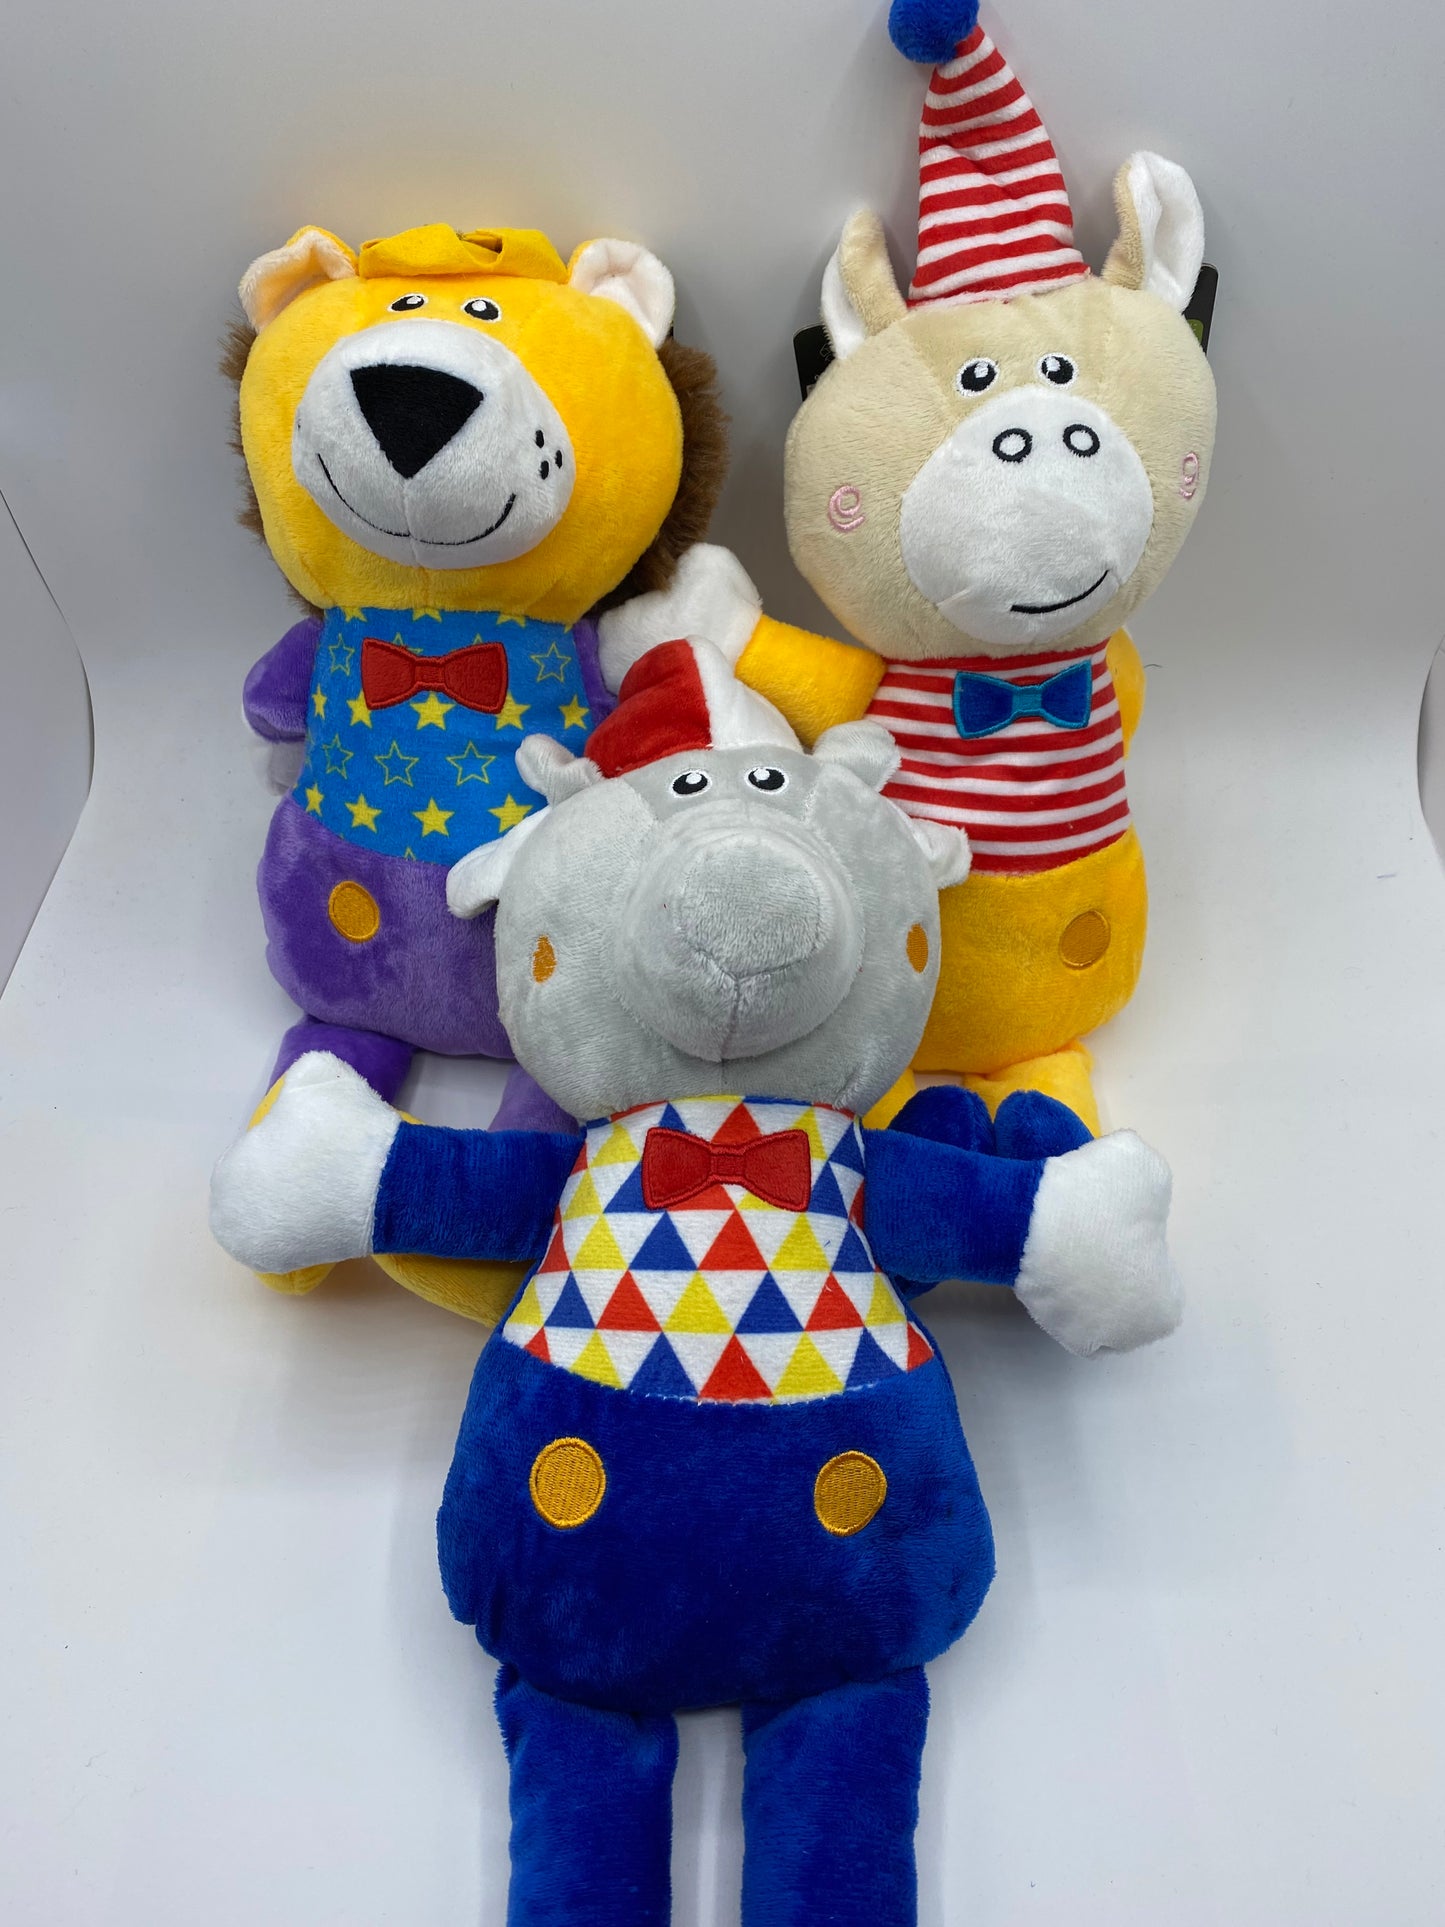 Plush Carnival Dog Toy in Three Designs Elephant,Cow and Lion Approx Size 36cm Long